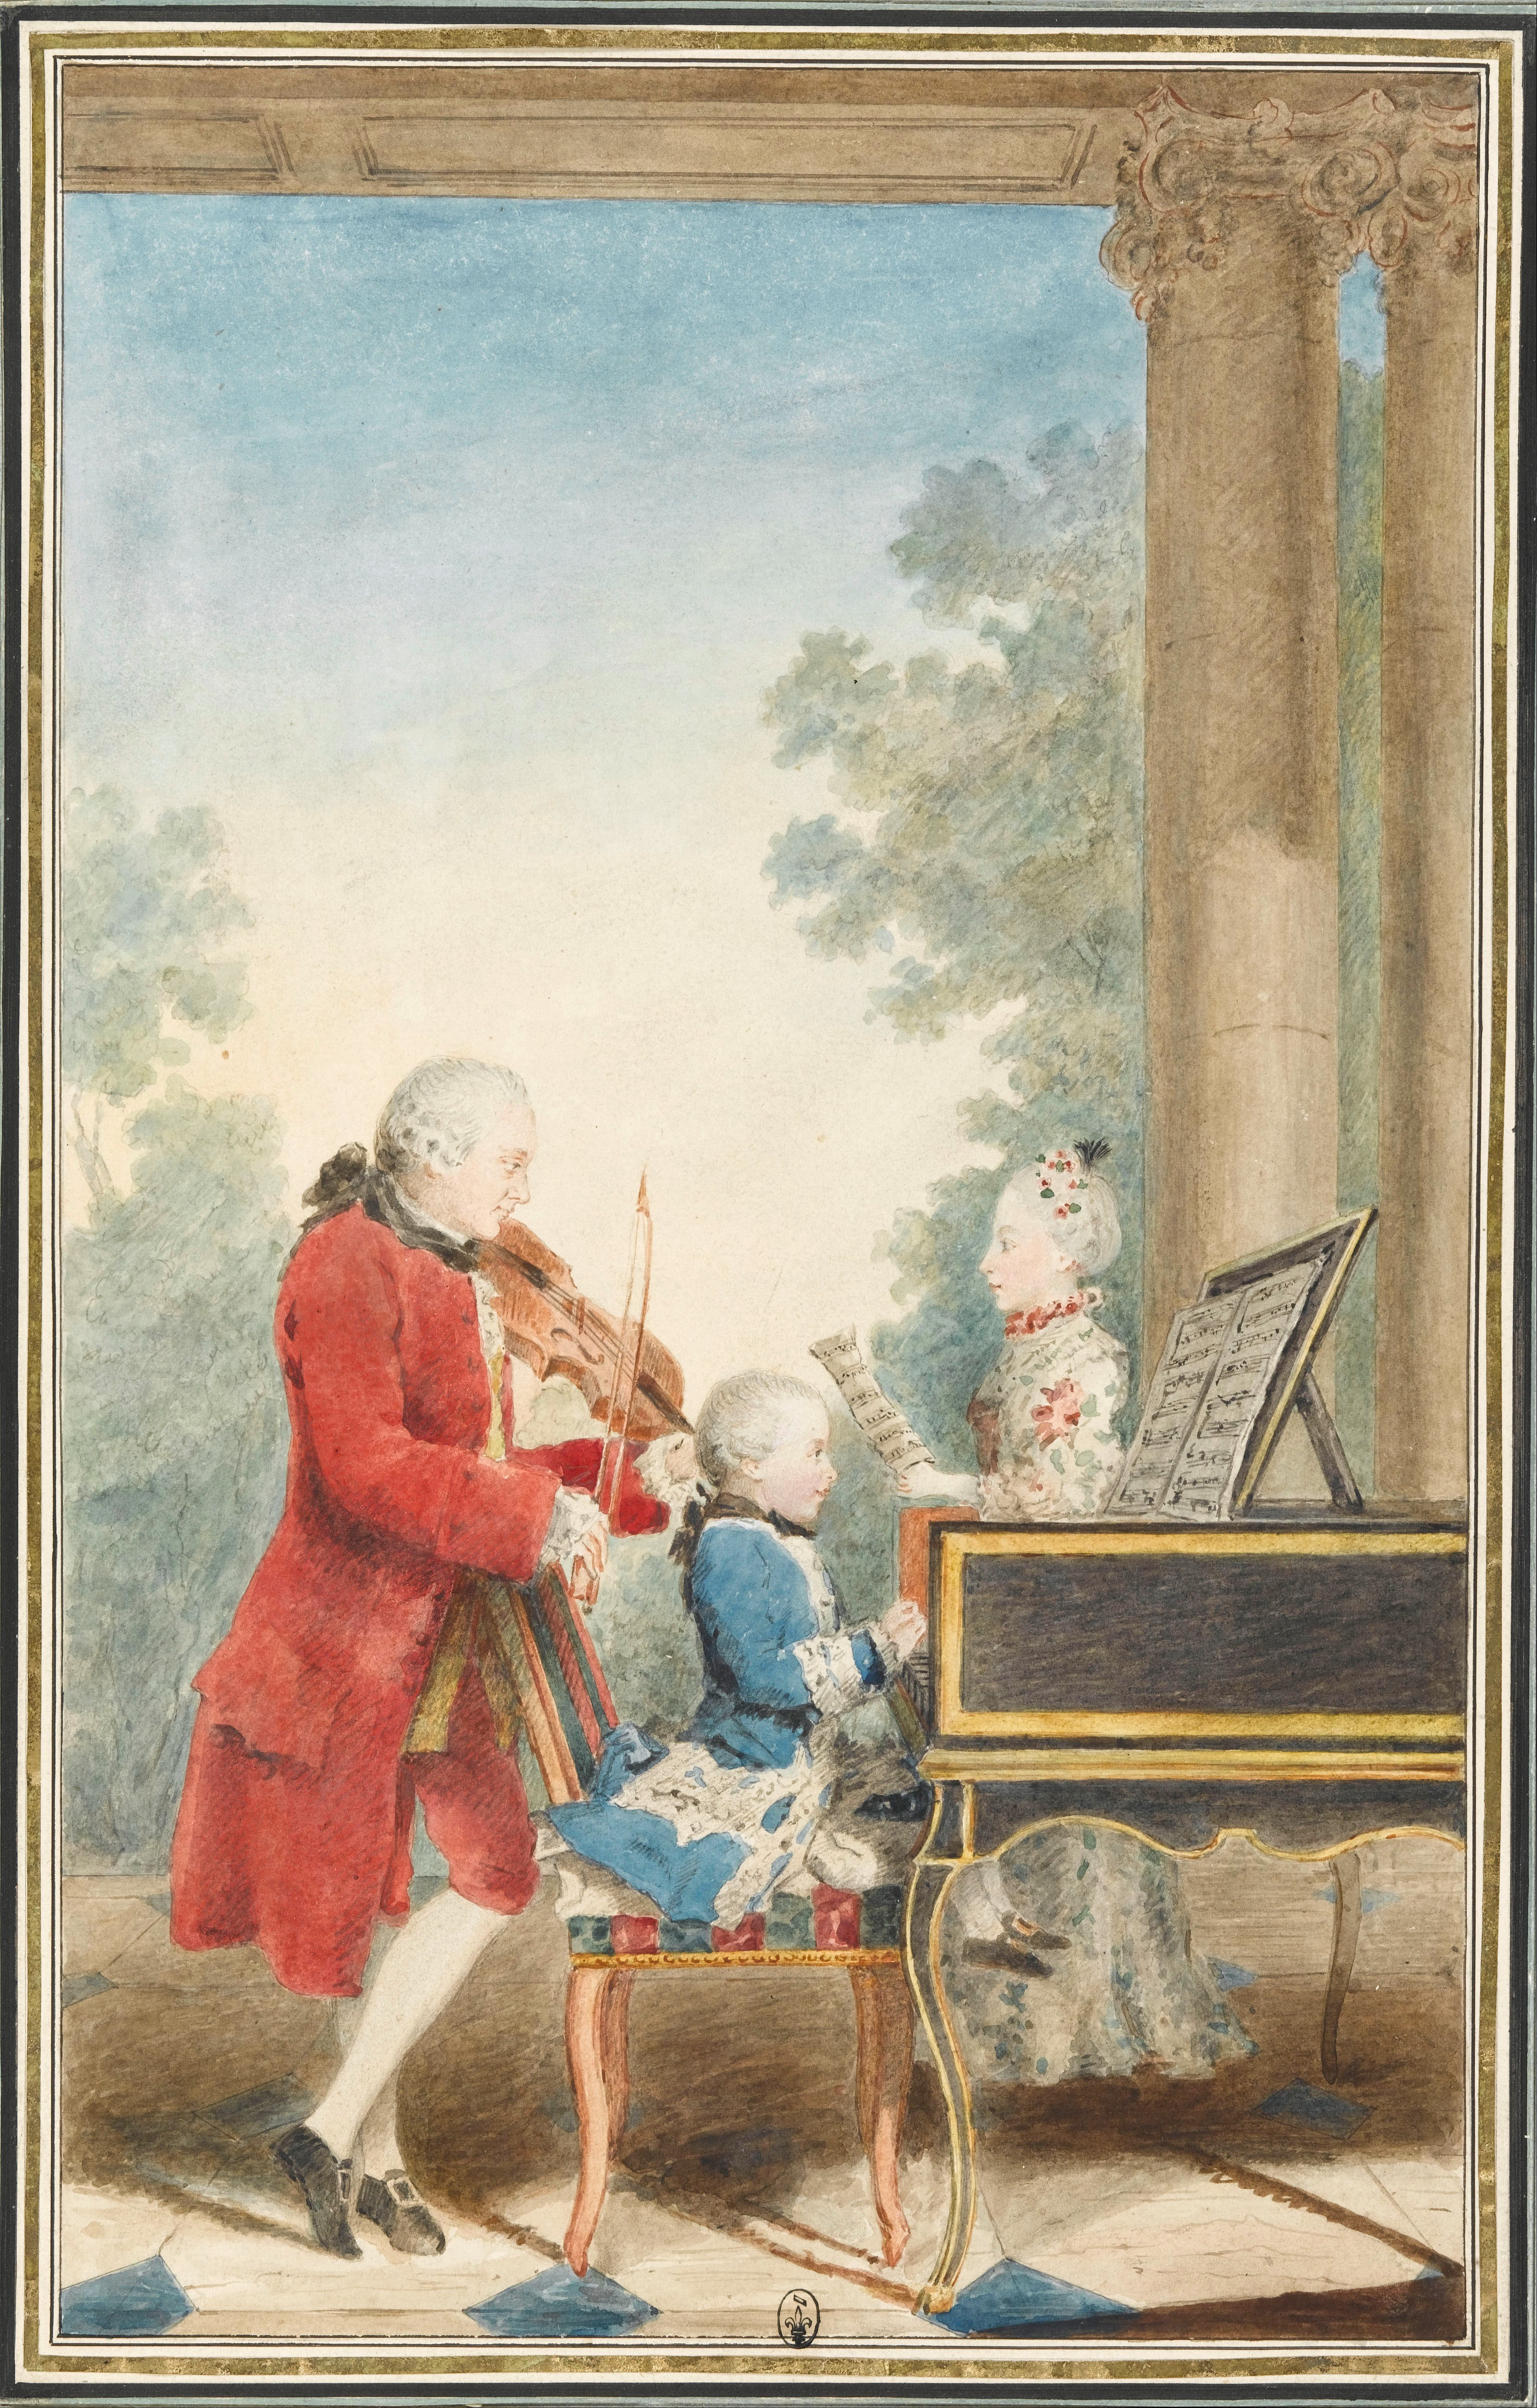 The Mozart family on tour: Leopold, Wolfgang, and Nannerl. Watercolor by Carmontelle, circa 1763. 